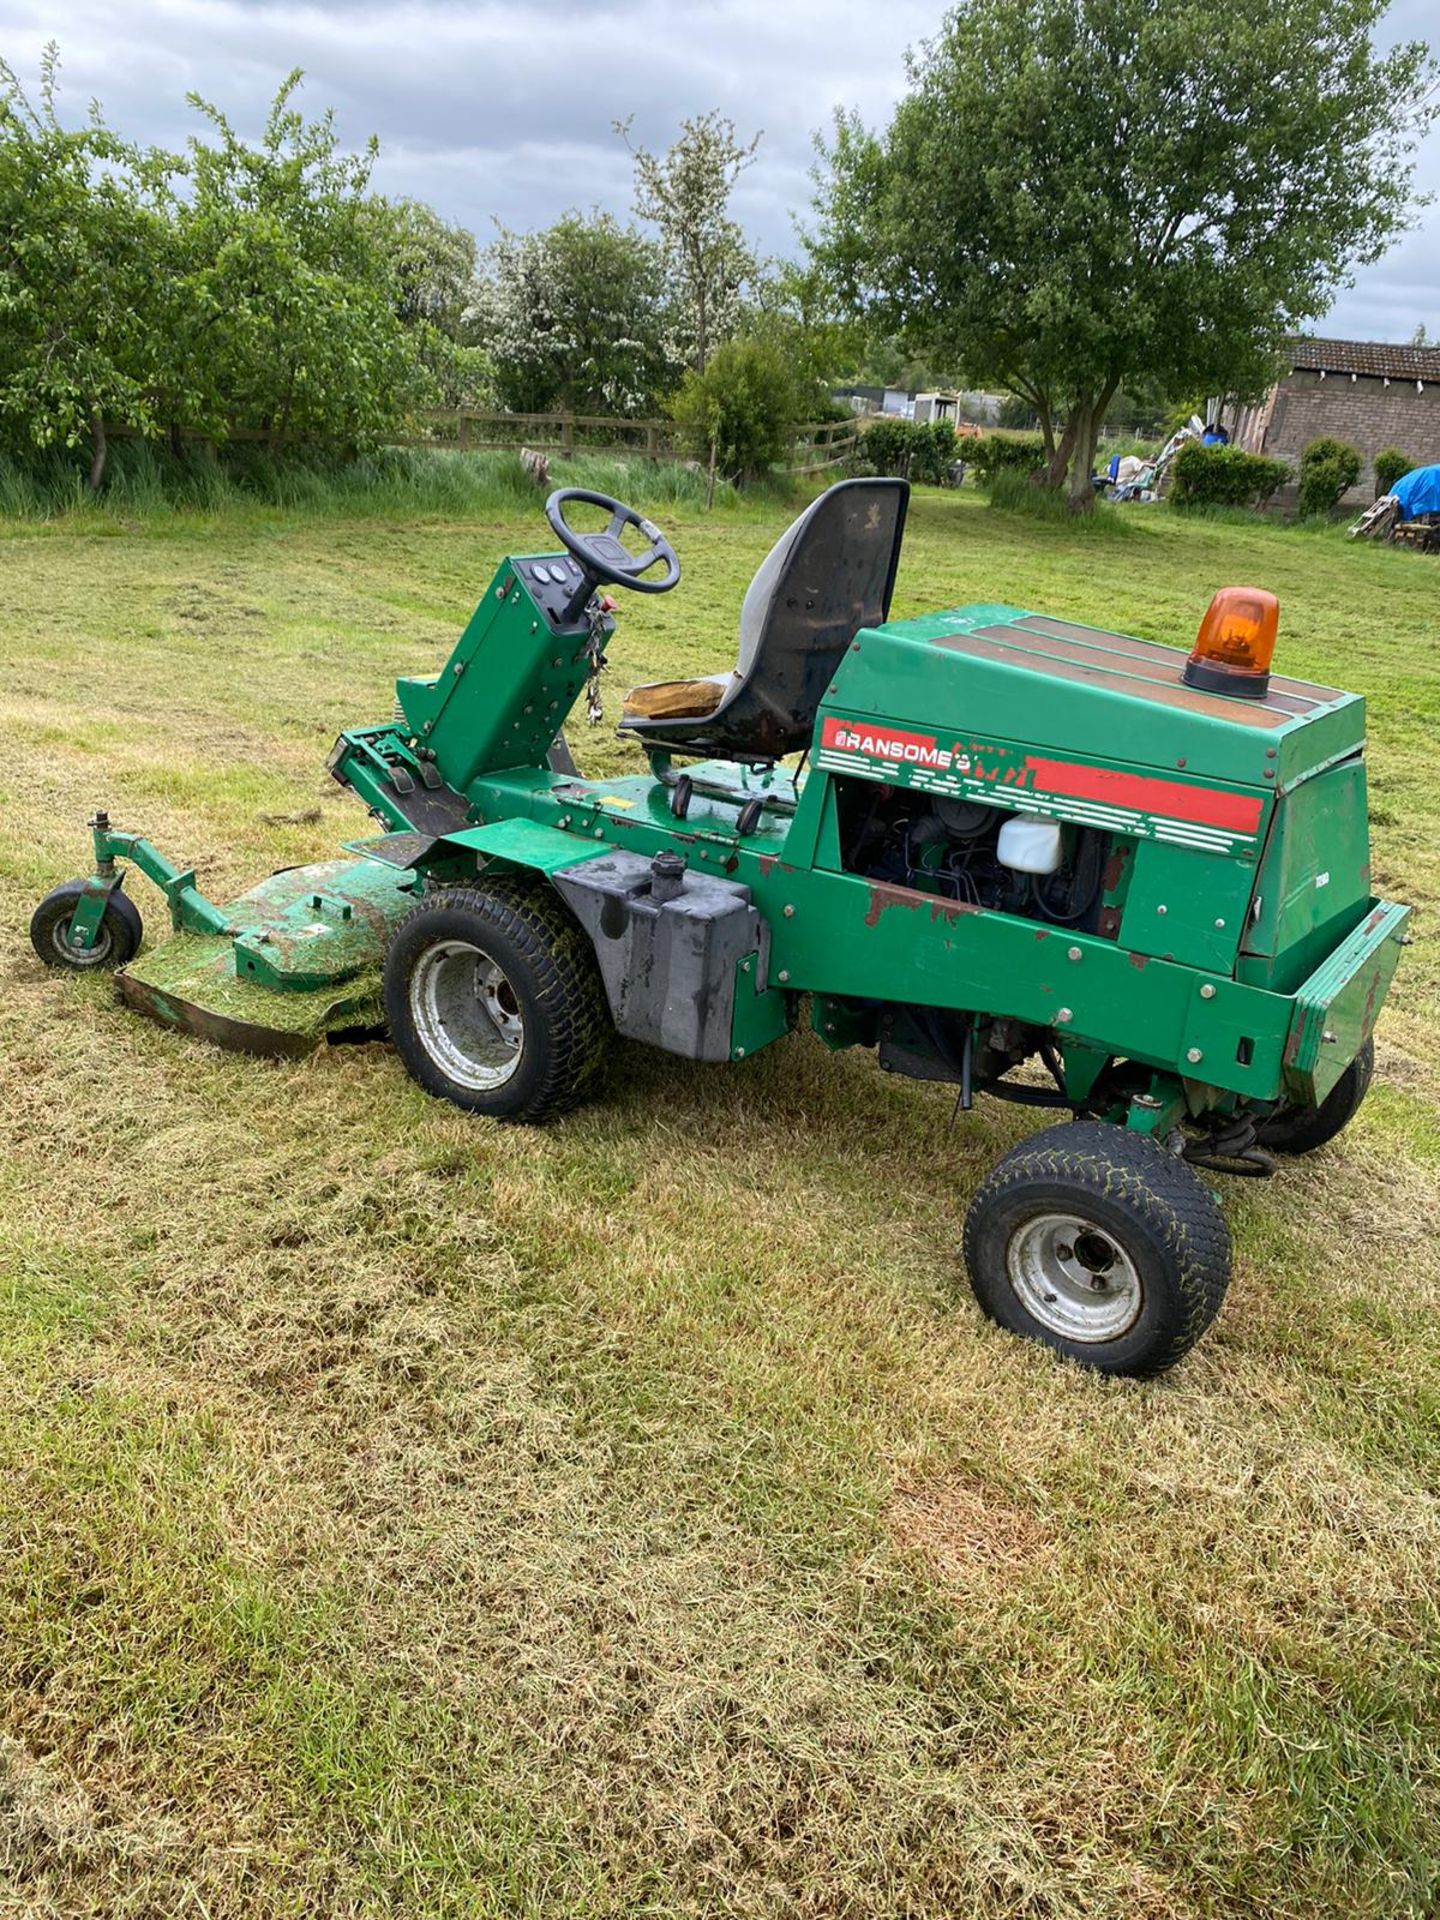 RANSOMES 728D RIDE ON LAWN MOWER, RUNS, WORKS, CUTS, 4 WHEEL DRIVE, 2019 HOURS *NO VAT* - Image 3 of 6